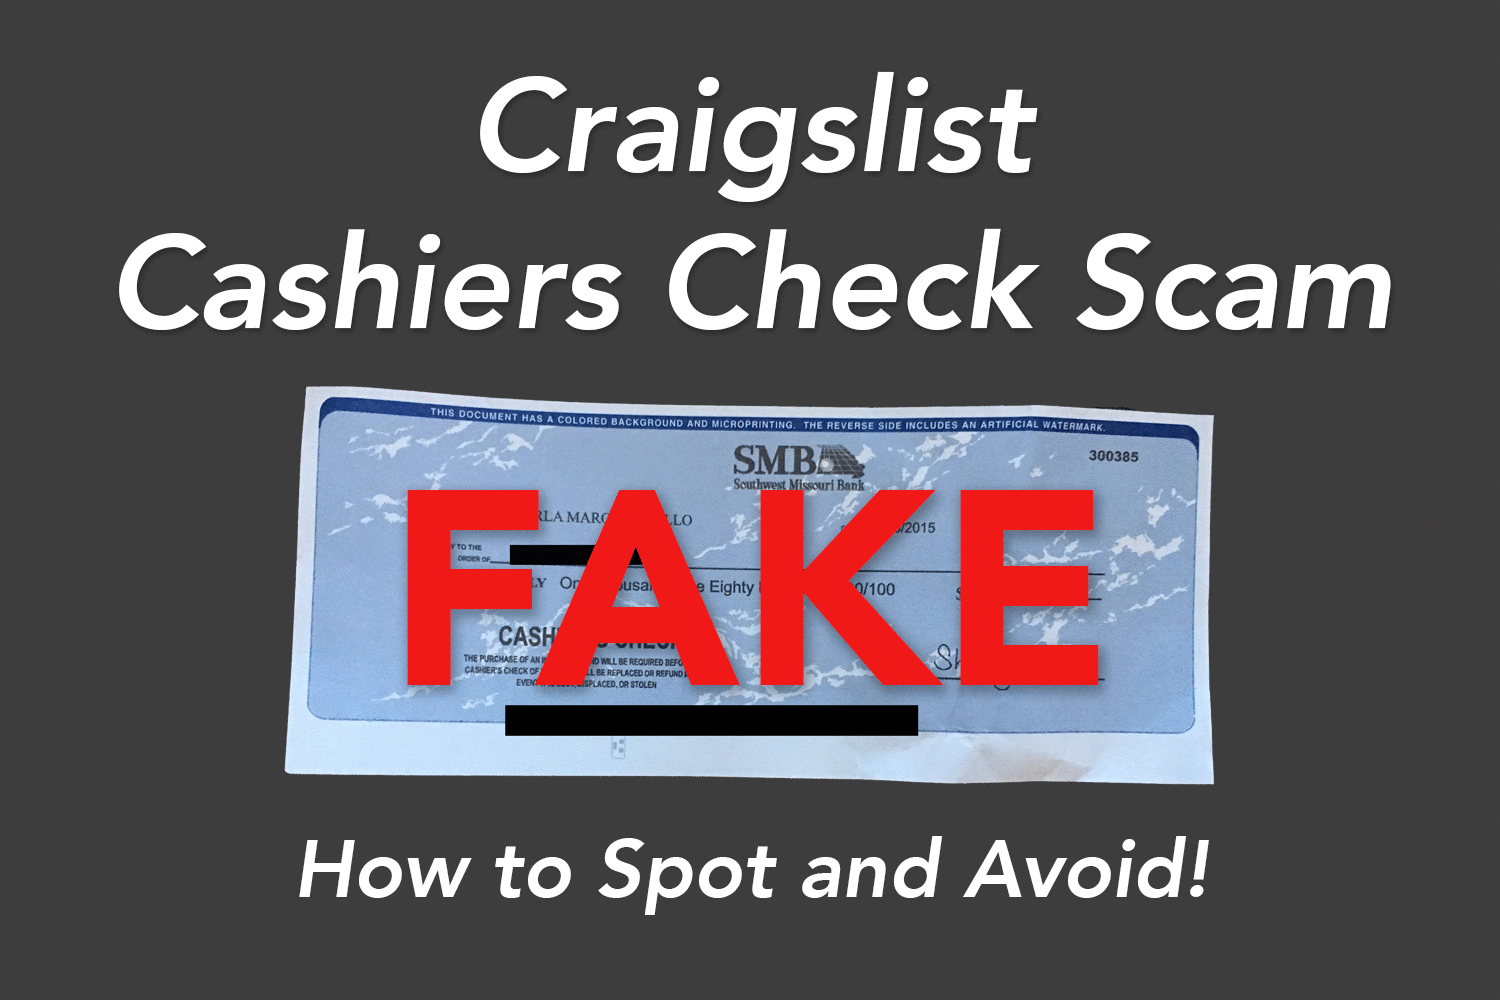 Craigslist Cashier’s Check Scam – How to Spot and Avoid